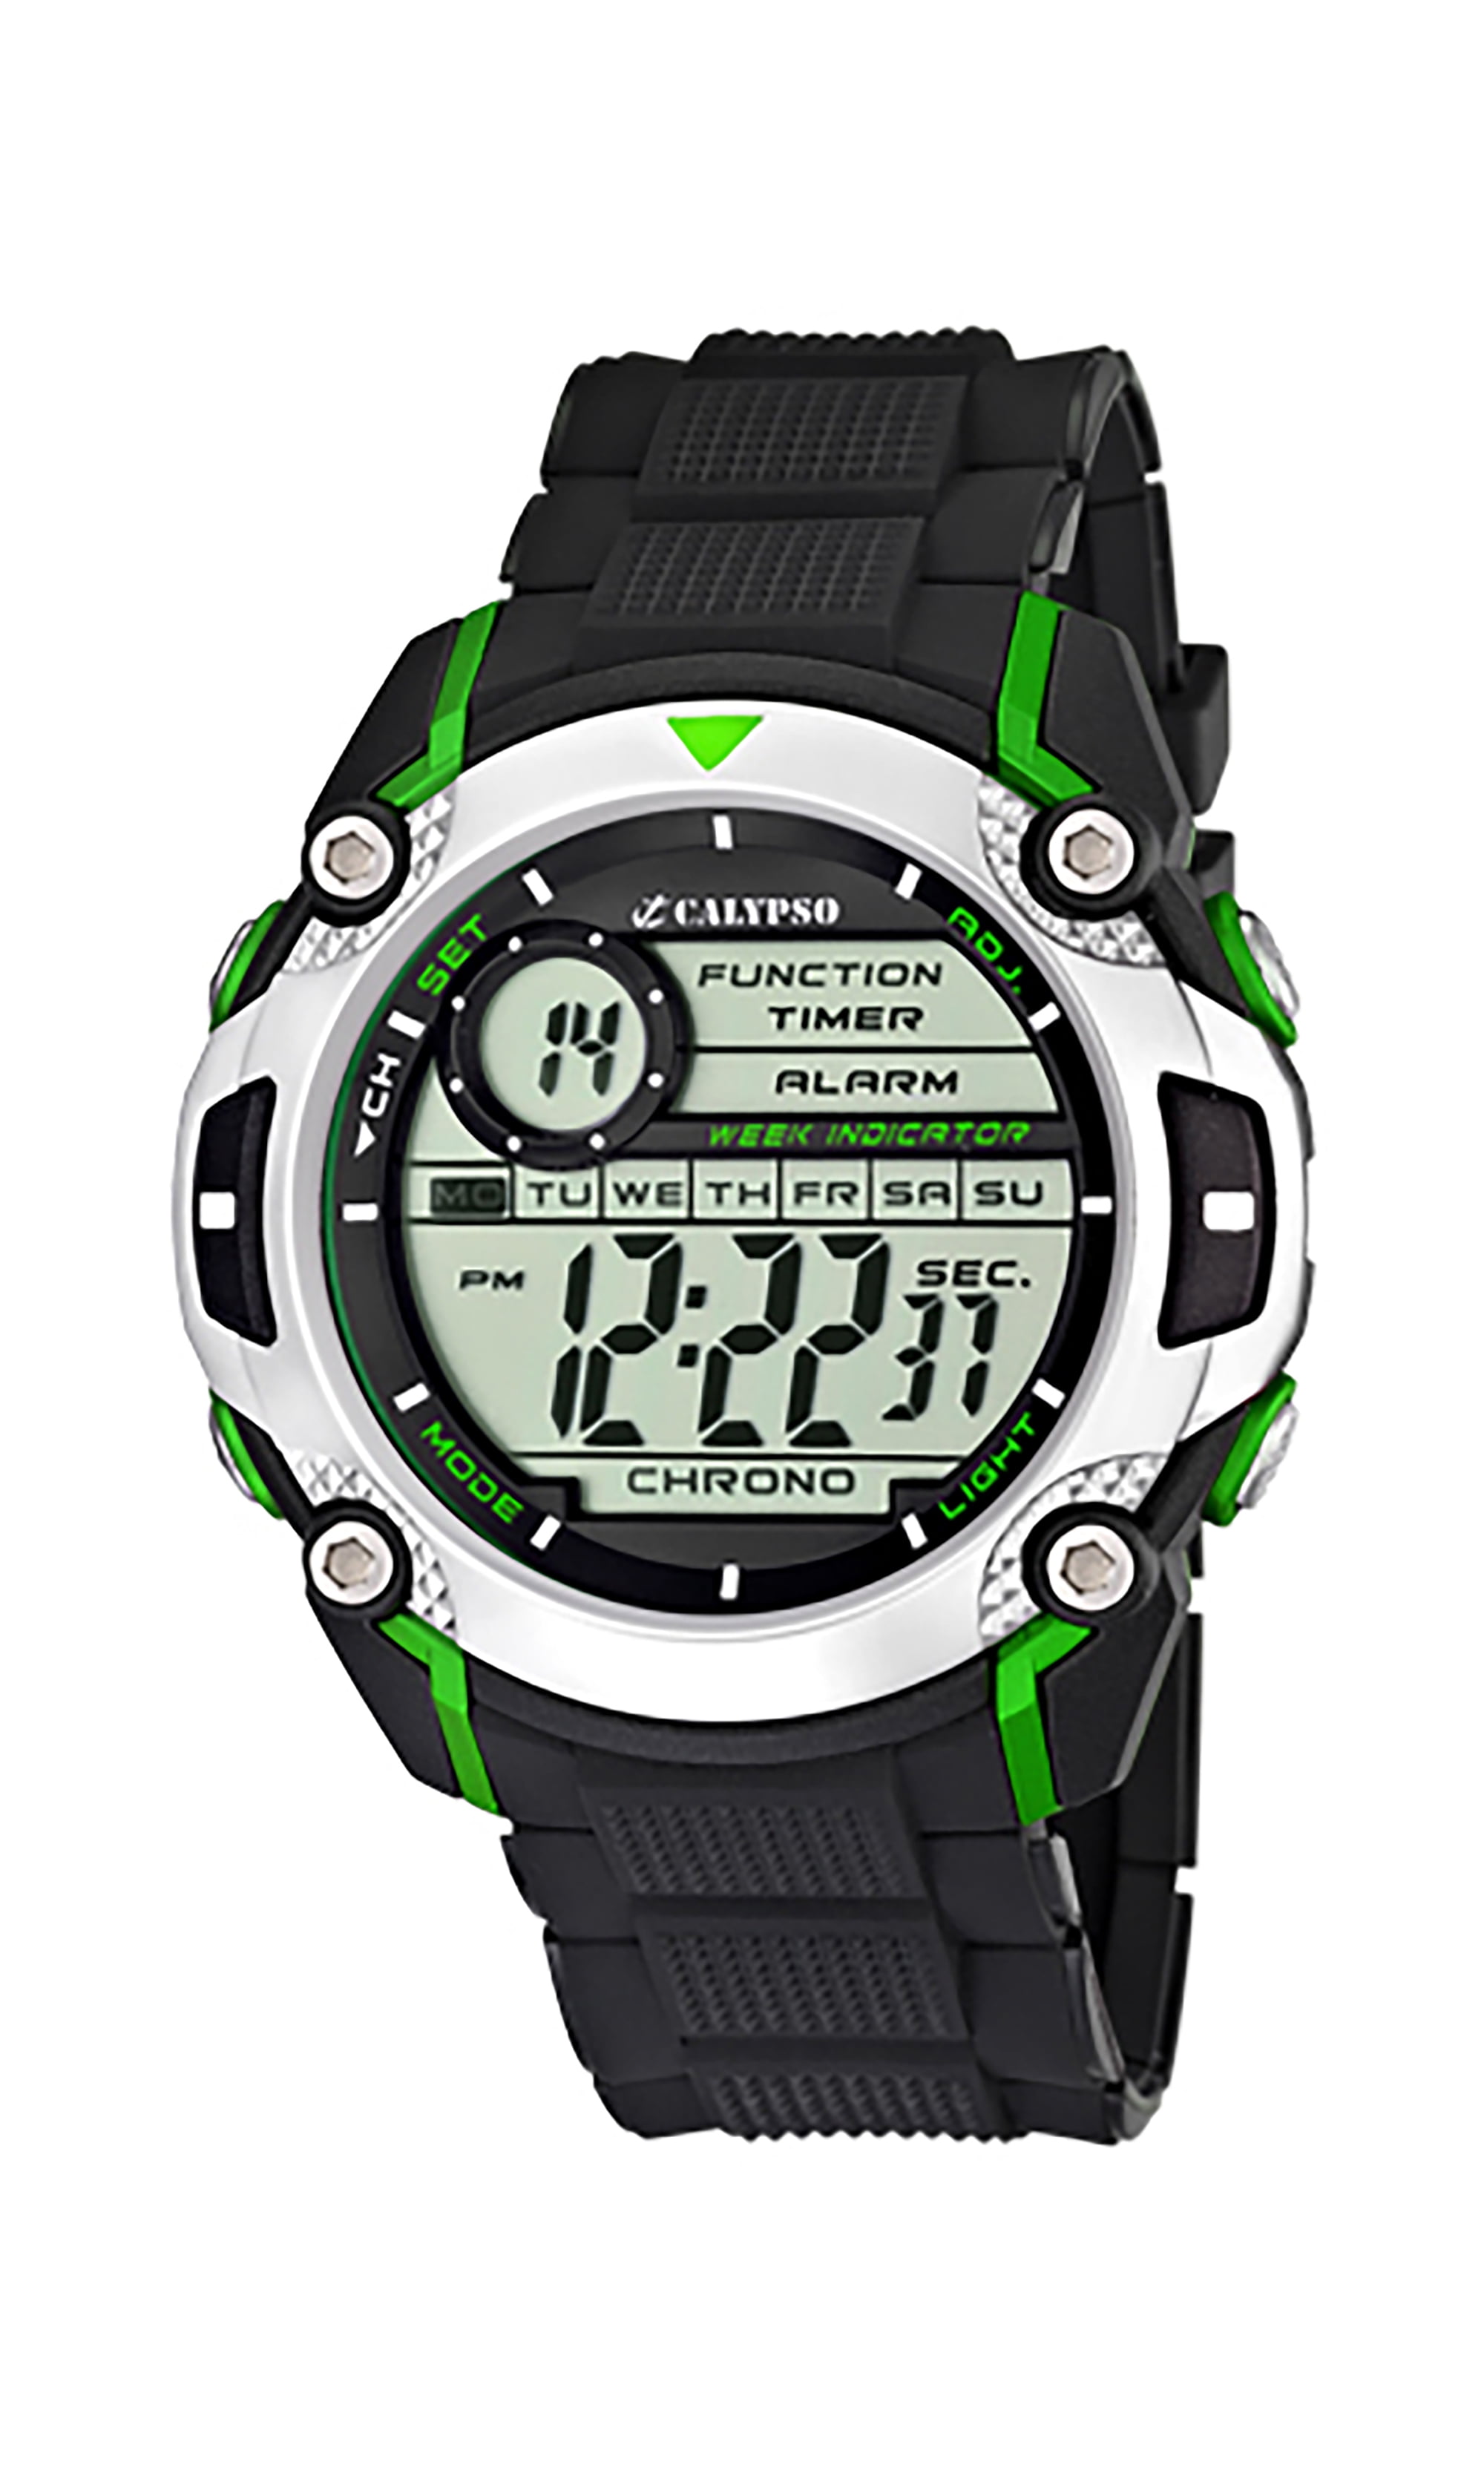 Strap, Calypso Digital Dual Day And 47mm - Watch, Date Time, Sports K5577 Silicone Mens Quartz, Chronograph,